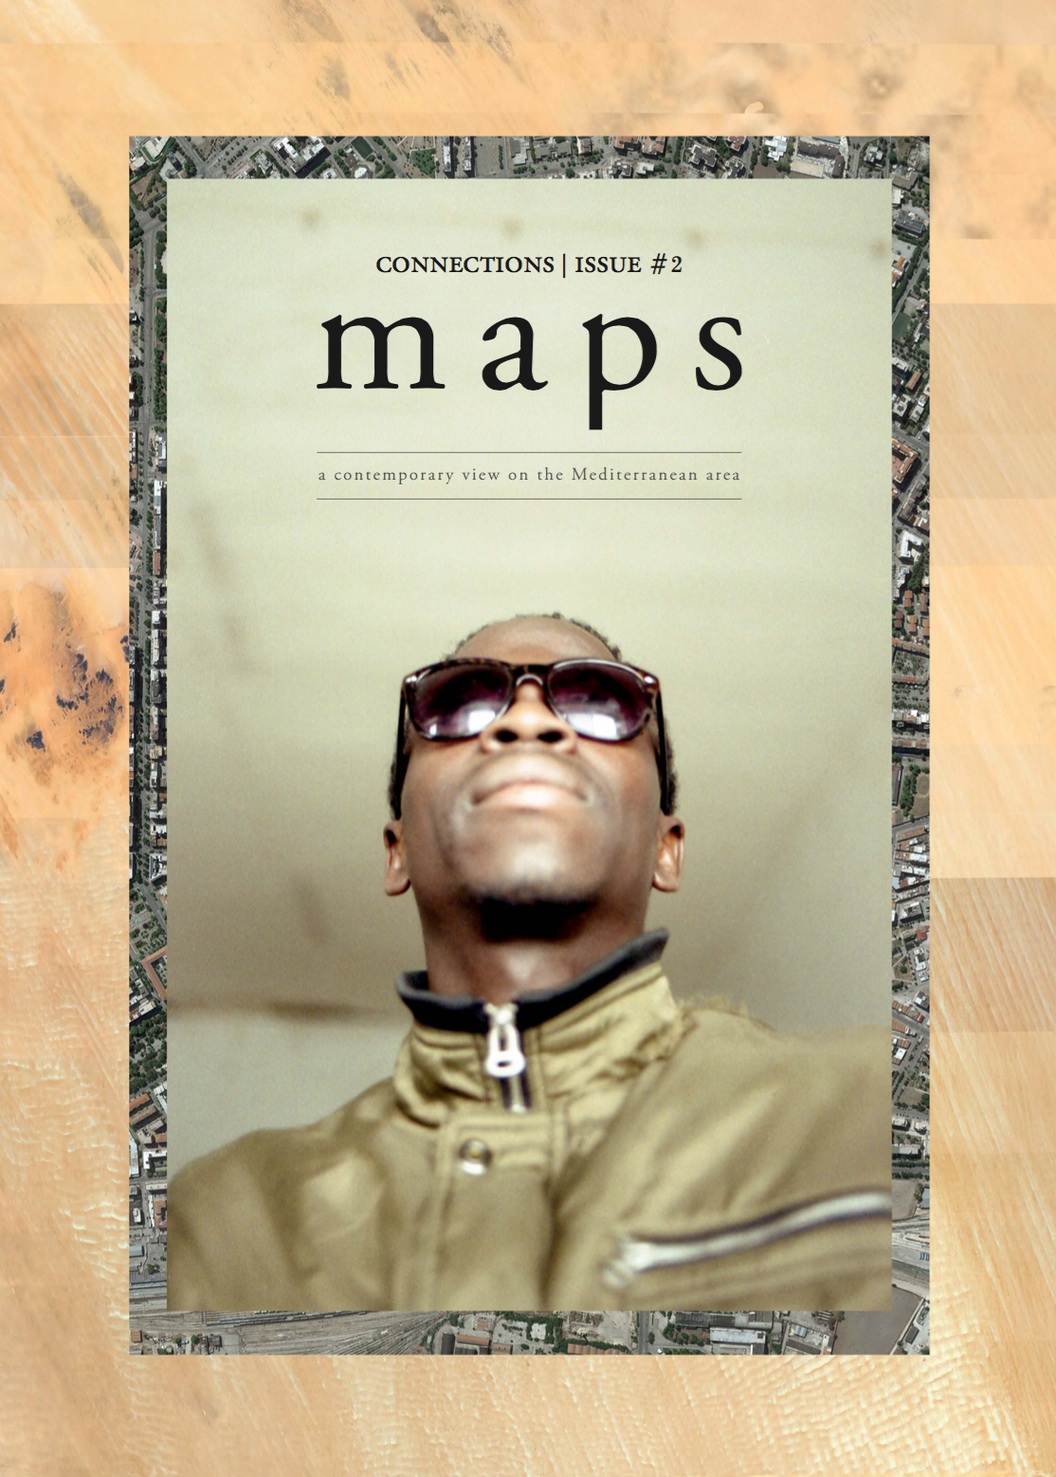 MAPS - a contemporary view on the Mediterranean area #2